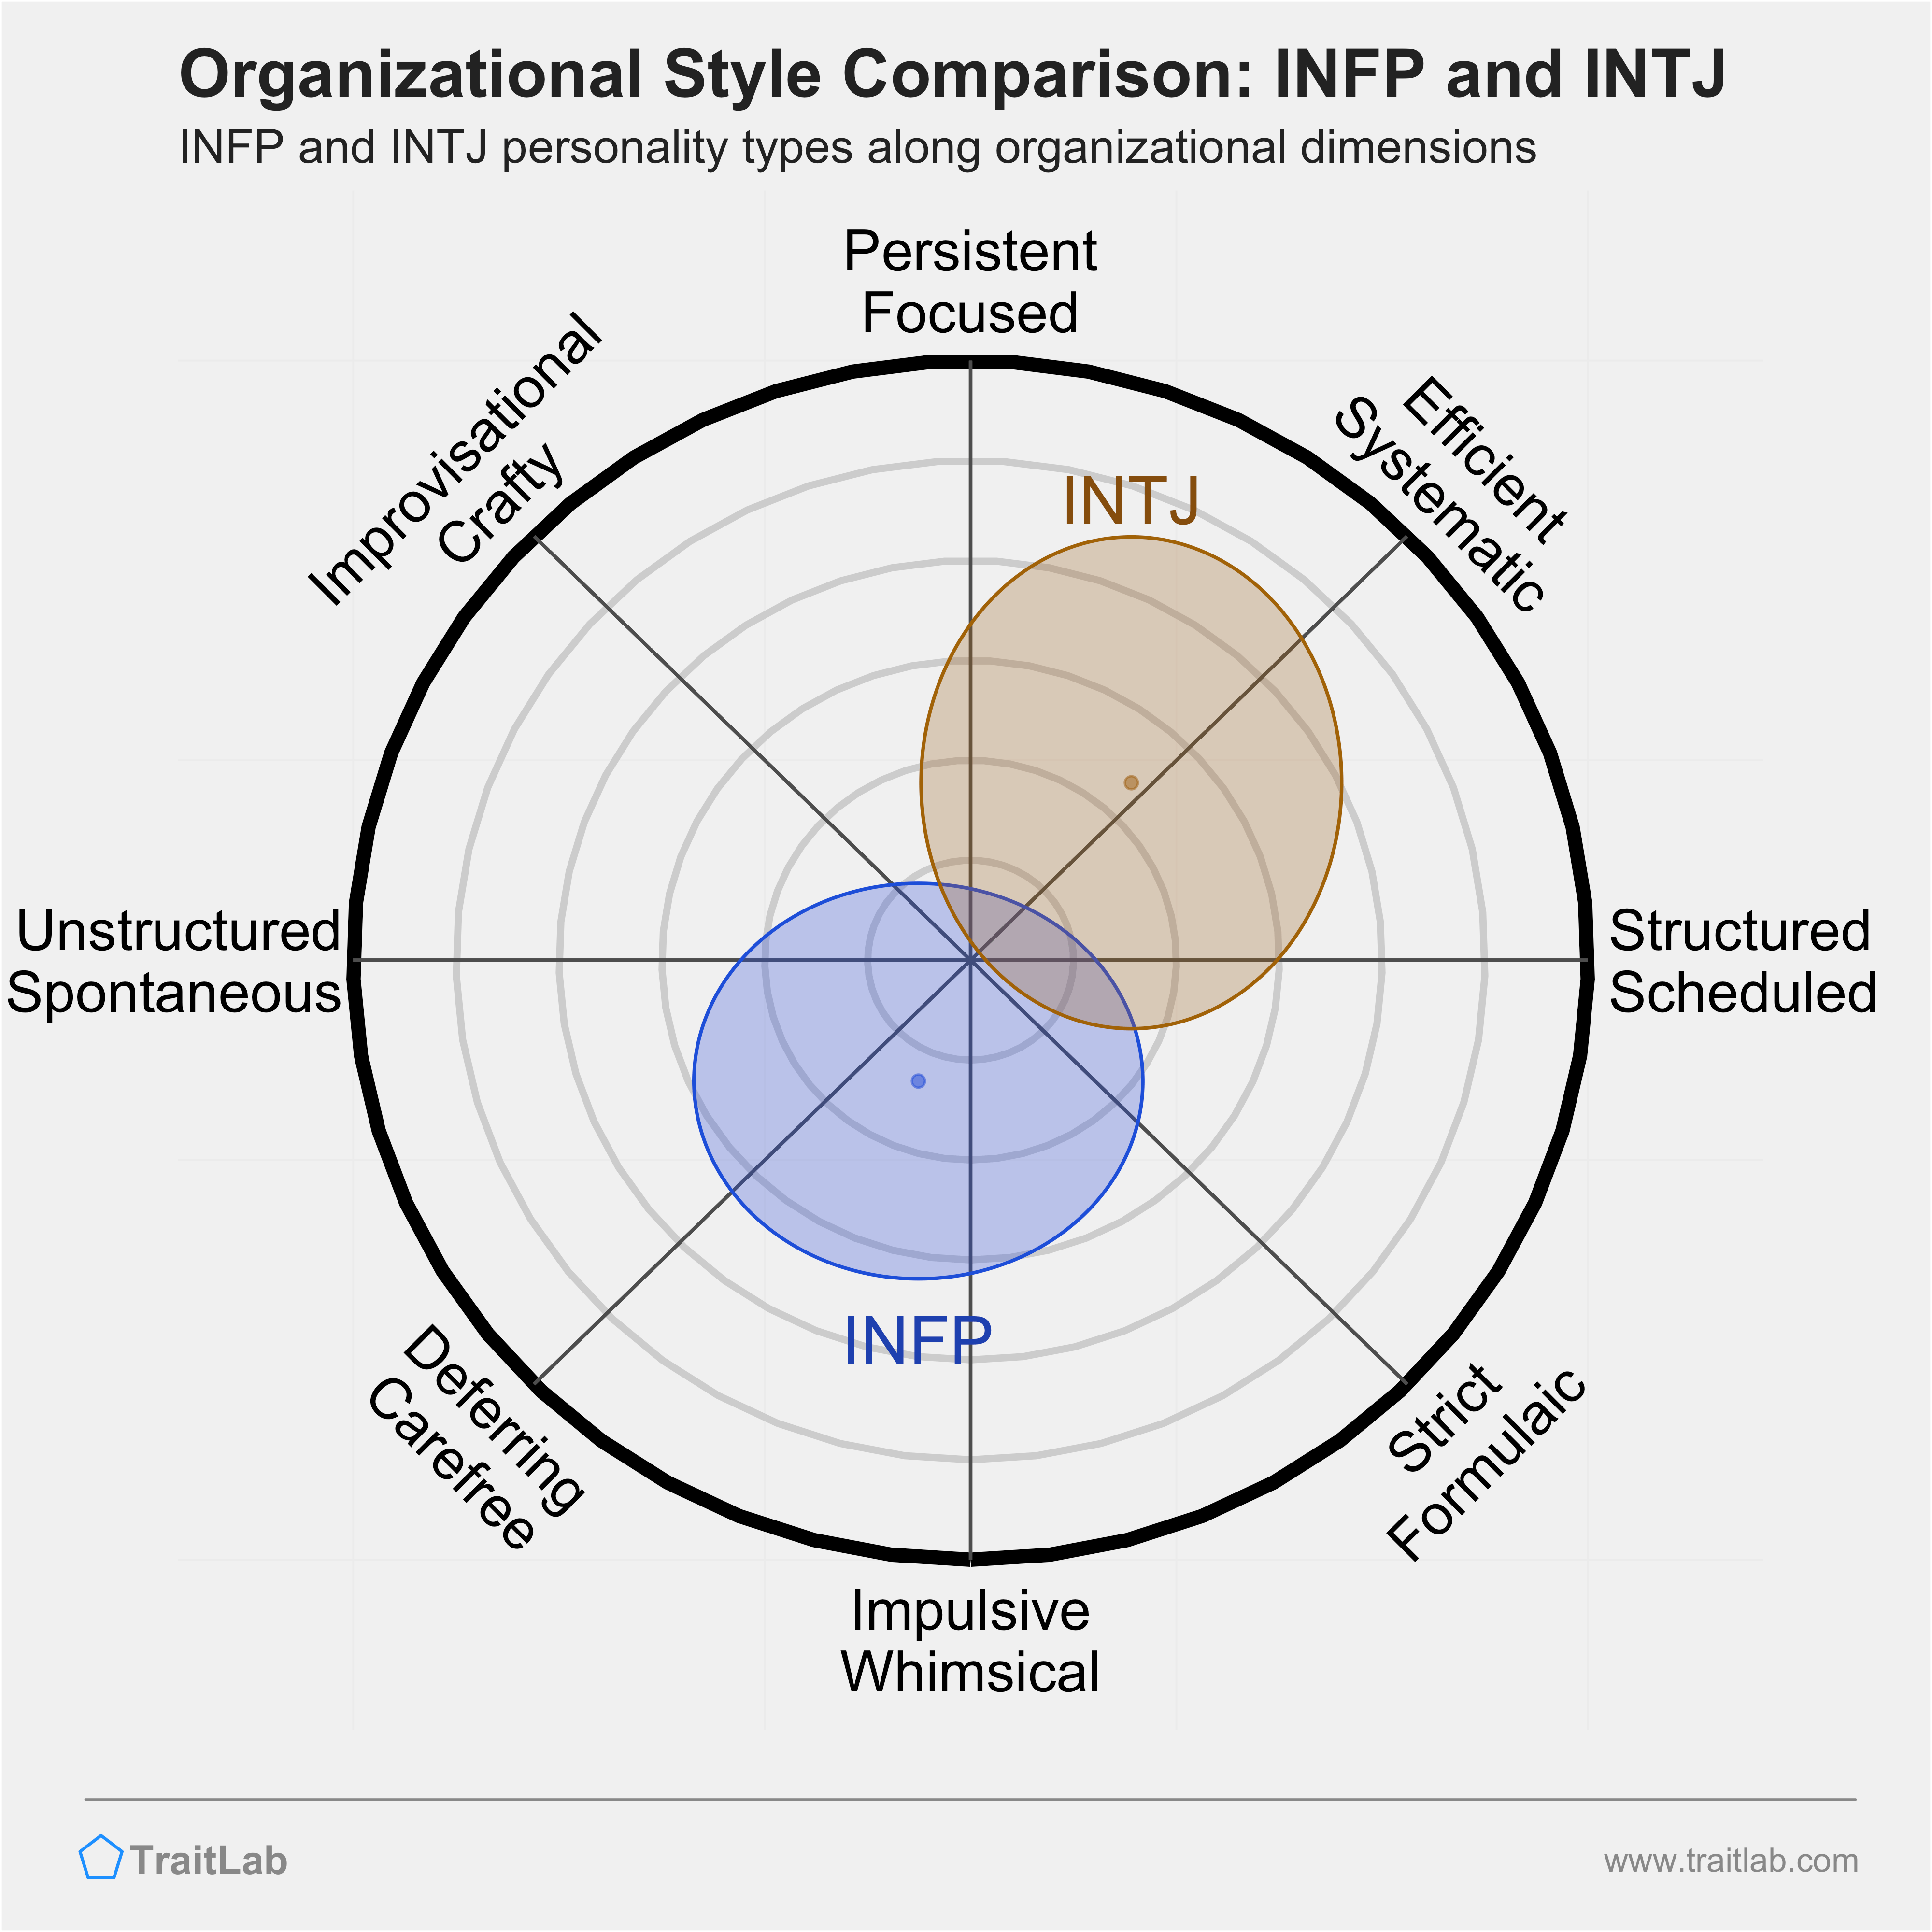 INFP and INTJ comparison across organizational dimensions